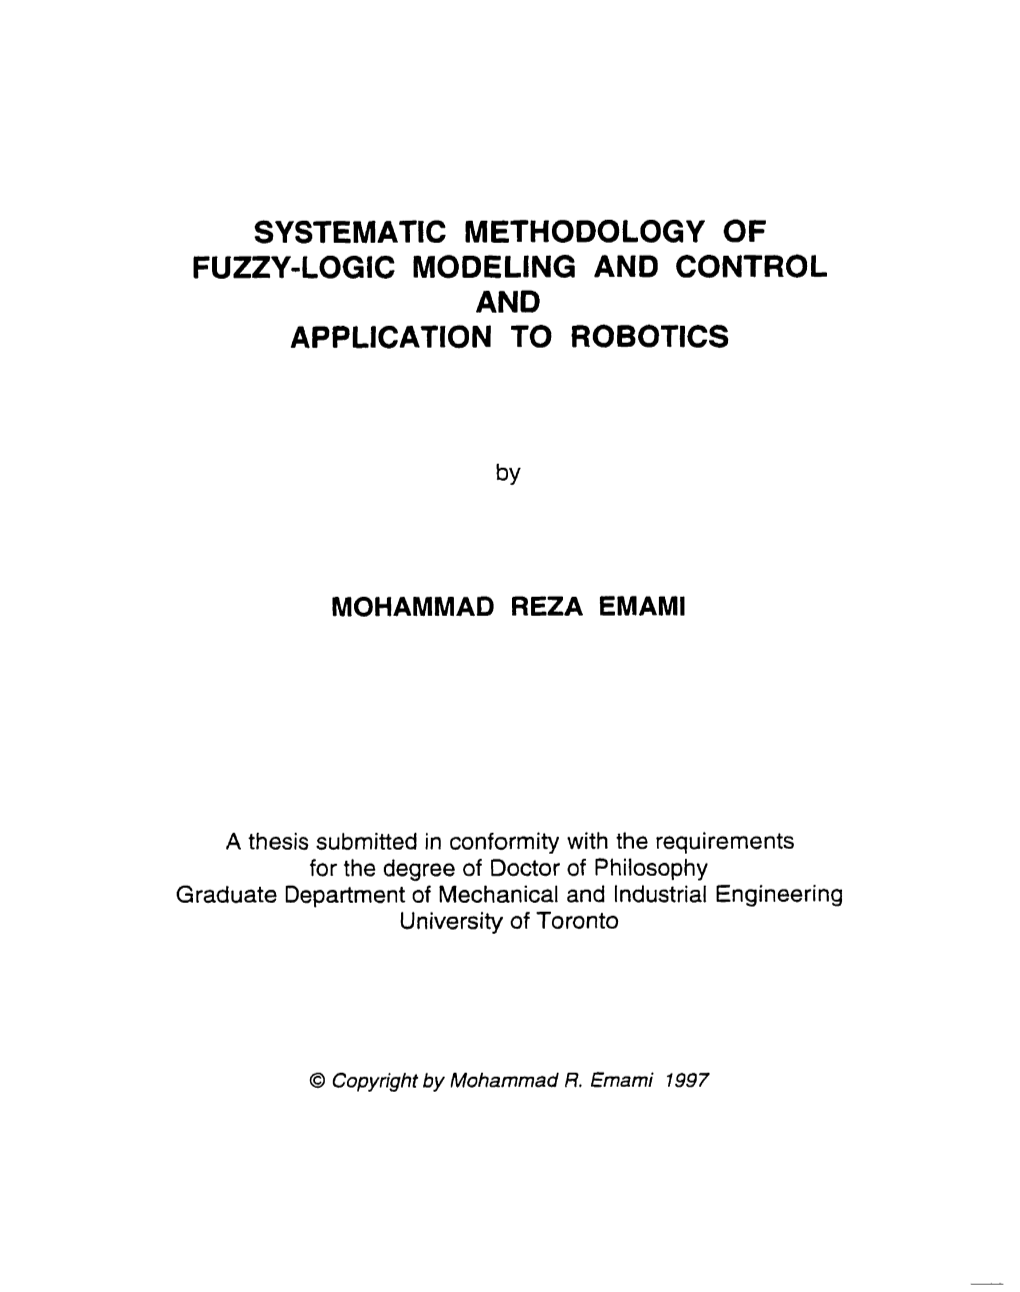 Systematic Methodology of Fuzzy-Logic Modeling and Control and Application to Robotics